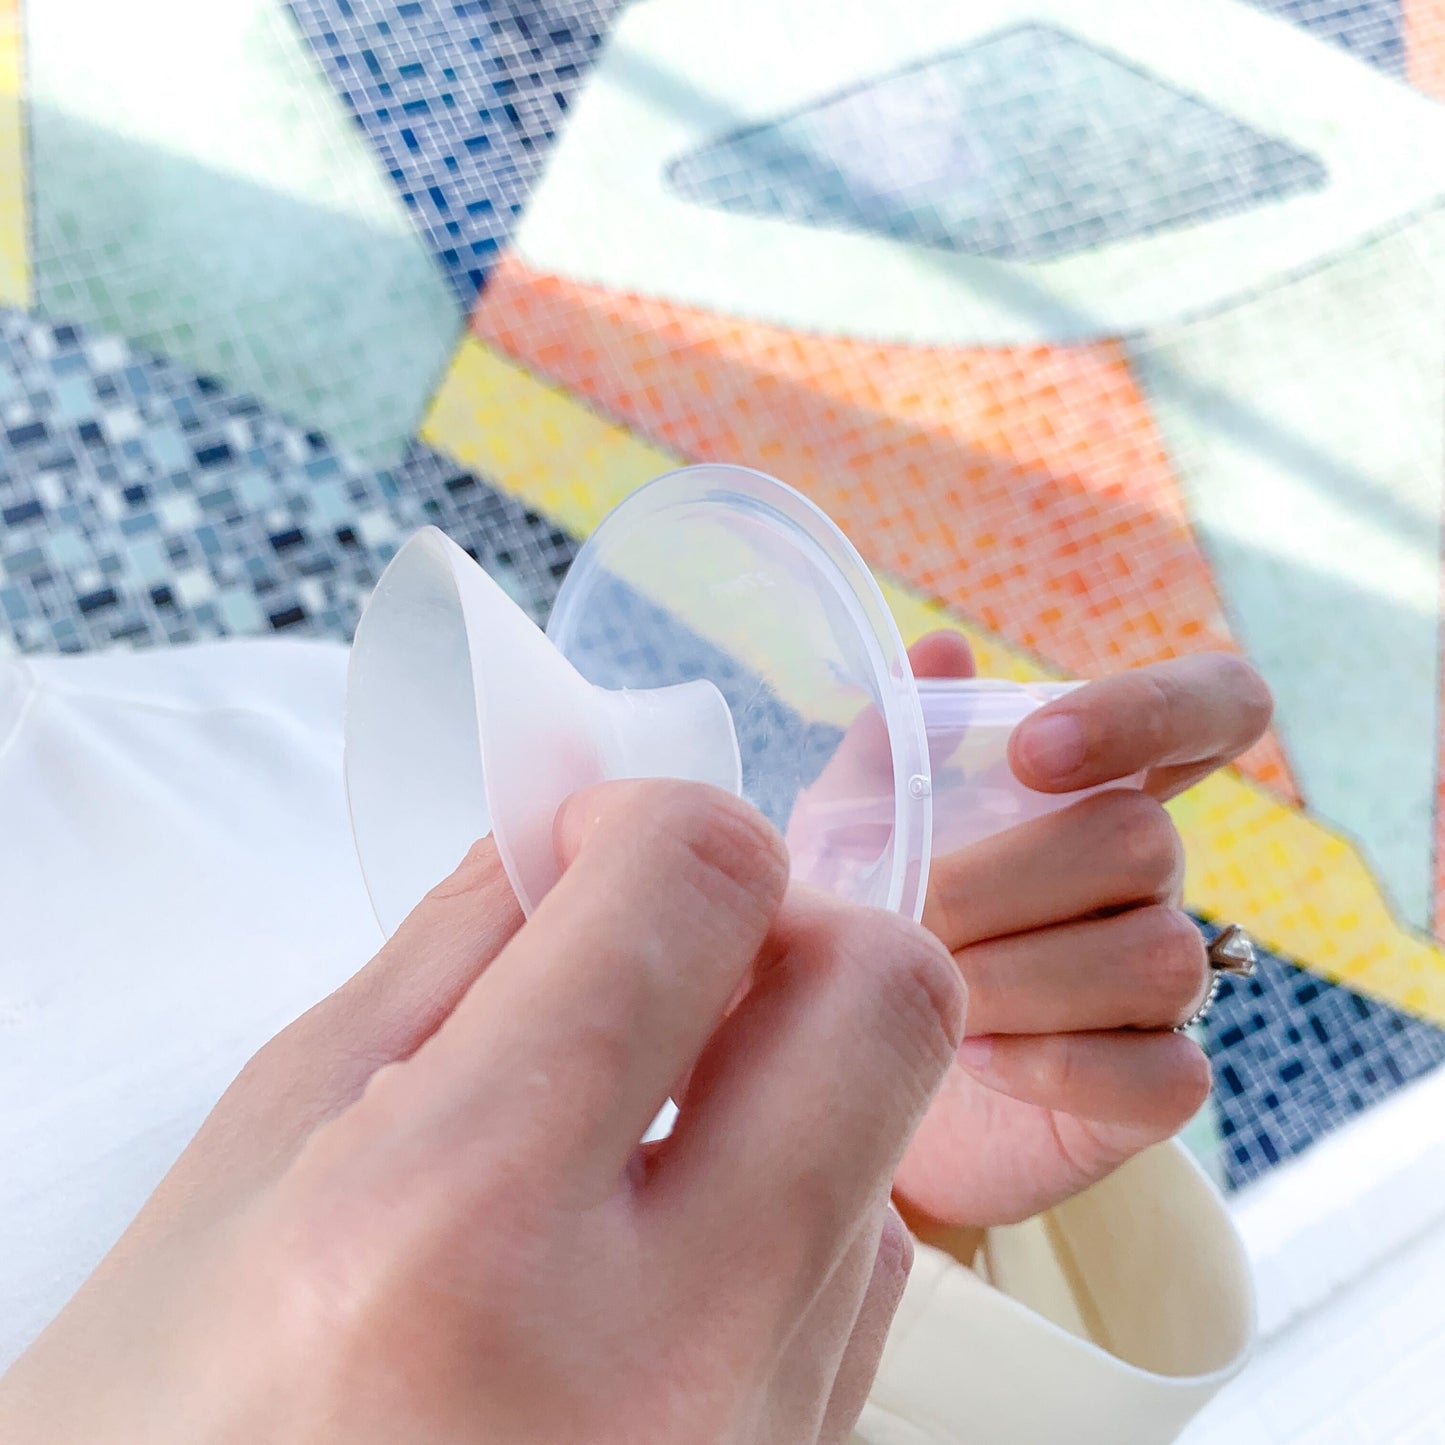 Using your first pair of Clearly comfy cushions is easy! Just wash and dry your breast pump cushion, and then insert it directly into your breast pump flange as shown here.